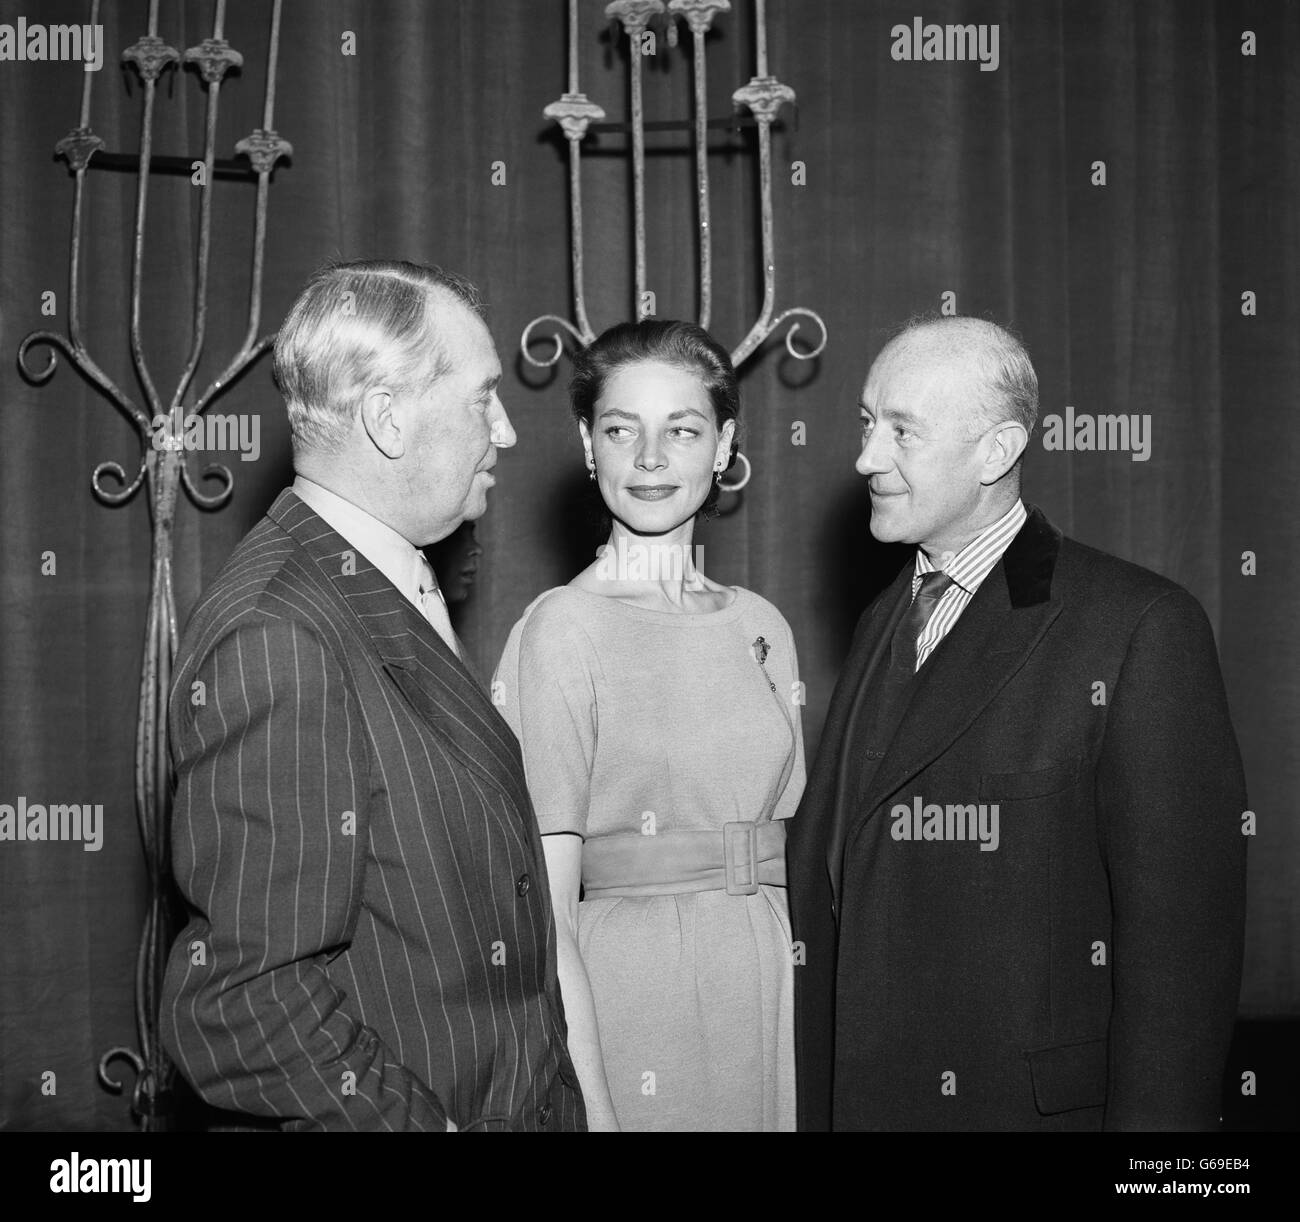 Maurice Chevalier (left) talks to Lauren Bacall and Alec Guinness at the rehearsal for the Royal Film Performance at the Empire Theatre in Leicester Square, London. Stock Photo